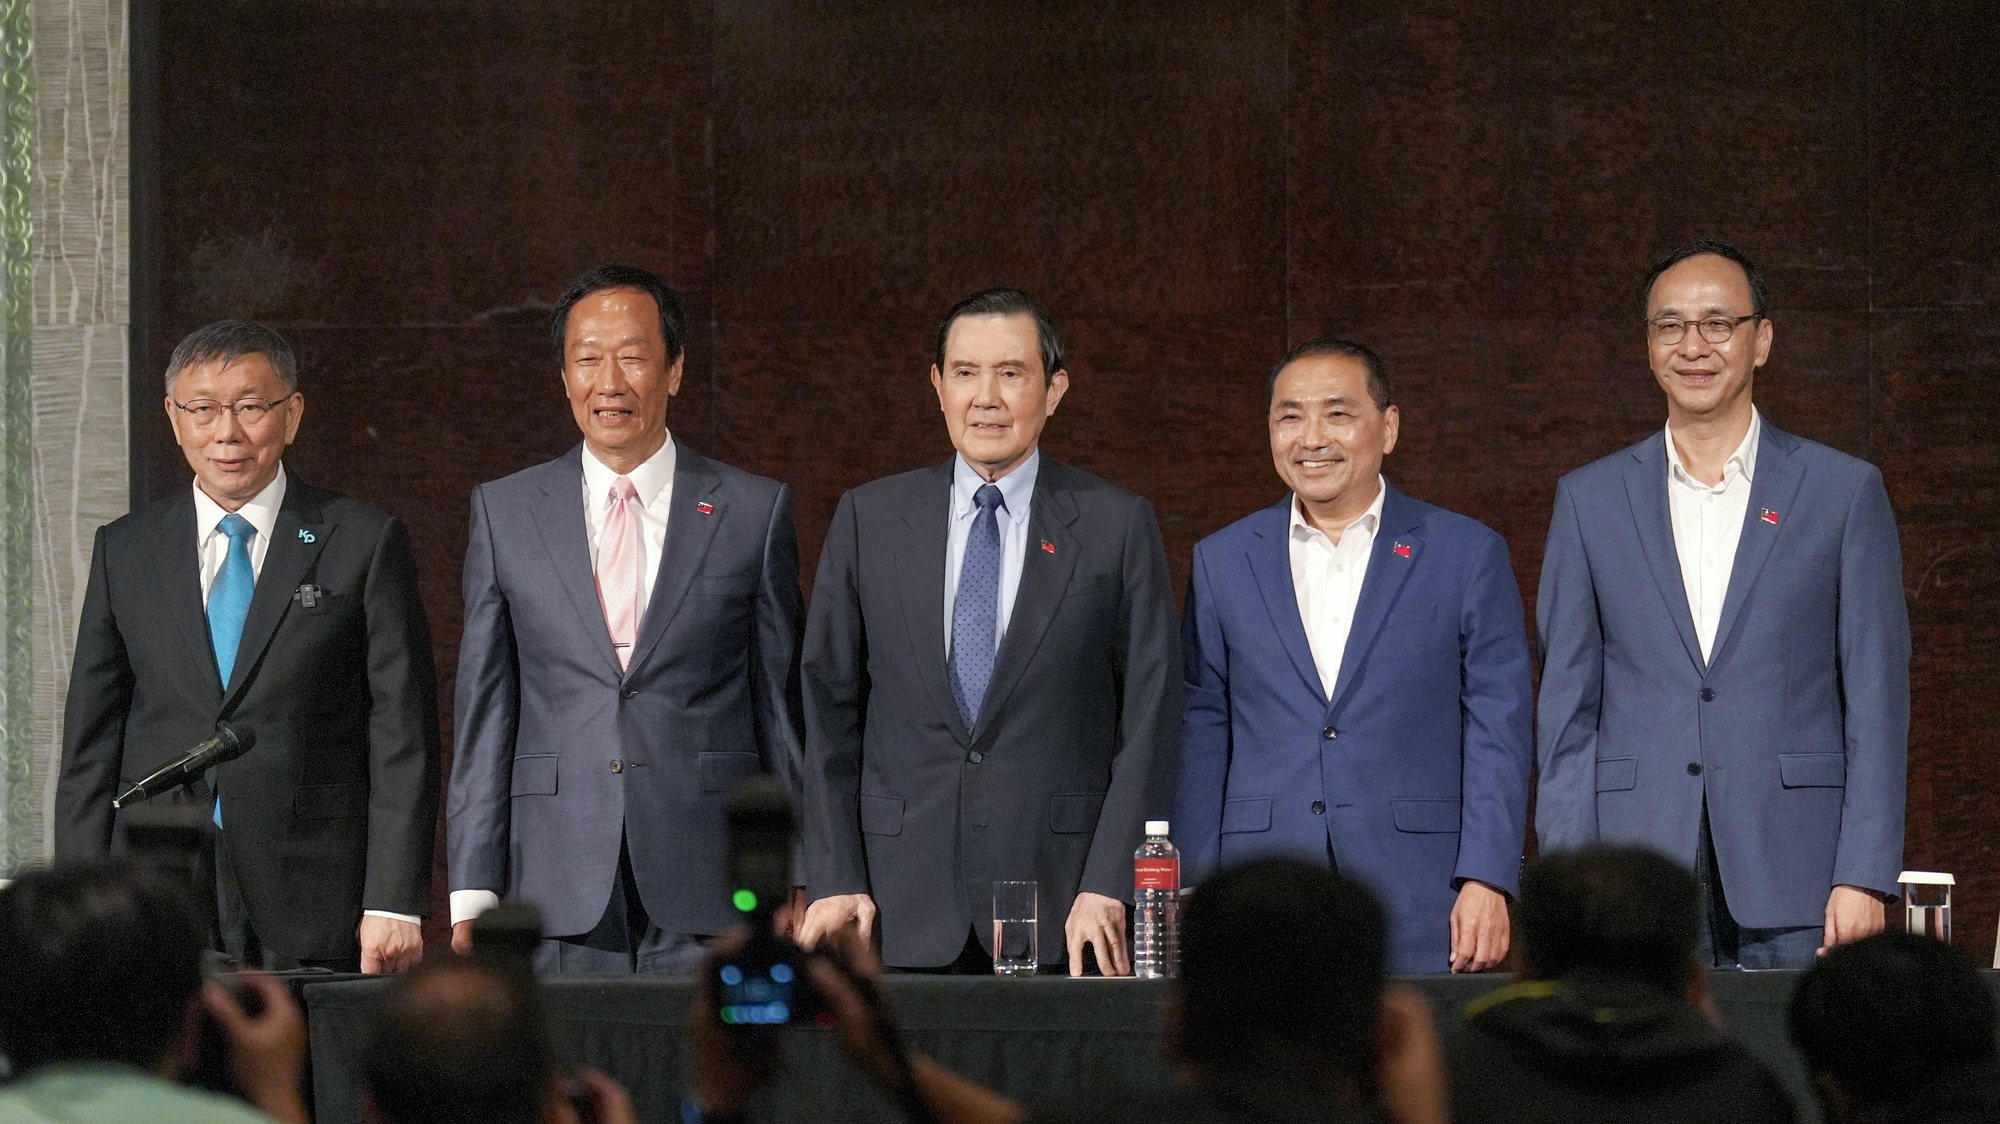 epa10990781 (L-R) Taiwan People&#039;s Party (TPP) chairman and presidential candidate Ko Wen-je, Foxconn founder and presidential candidate Terry Gou, former Taiwan President Ma Ying-jeou, Kuomintang (KMT) presidential candidate Hou Yu-ih and KMT Chairman Eric Chu attend a press conference in Taipei, Taiwan, 23 November 2023. Talks to form an opposition coalition to challenge the main ruling party in the presidential election next year remain deadlocked after a meeting between the three candidates Taiwan People&#039;s Party’s (TPP) Ko Wen-je, Foxconn founder Terry Gou and Kuomintang’s (KMT) Hou Yu-ih, twenty-four hours before the deadline for registration of presidential candidates.  EPA/WALID BERRAZEG